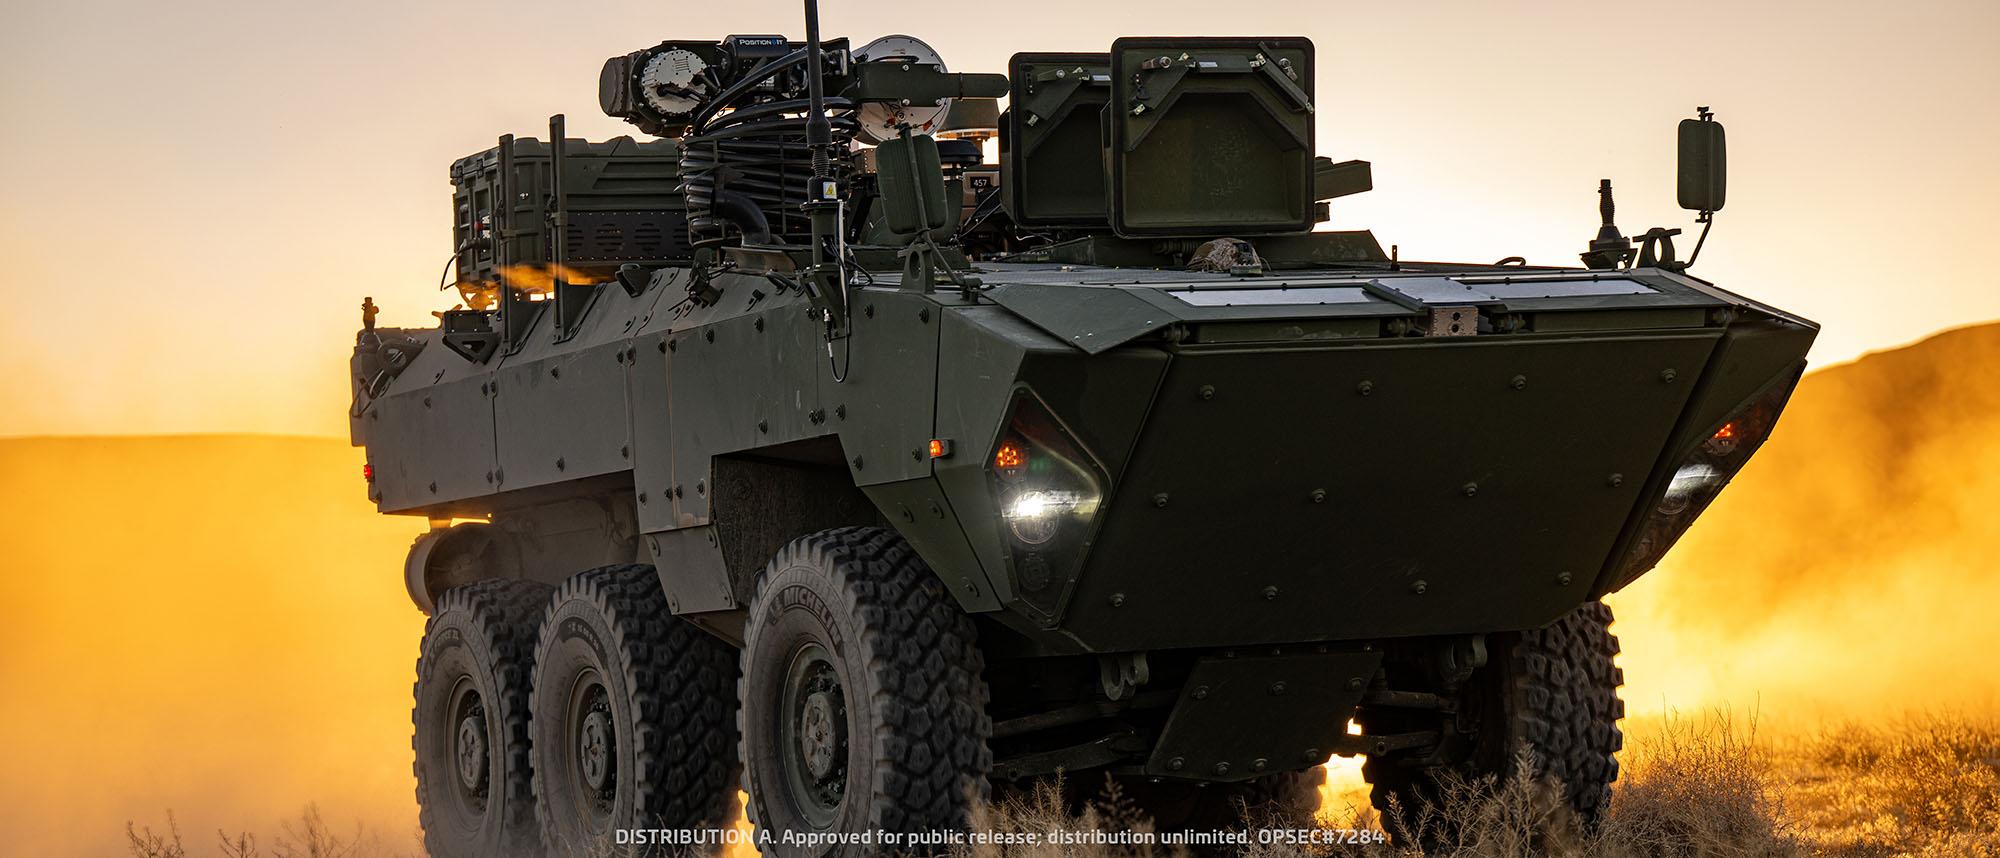 Cottonmouth - Build for the United States Marine Corp Advanced Reconnaisance Vehicl (ARV) program.